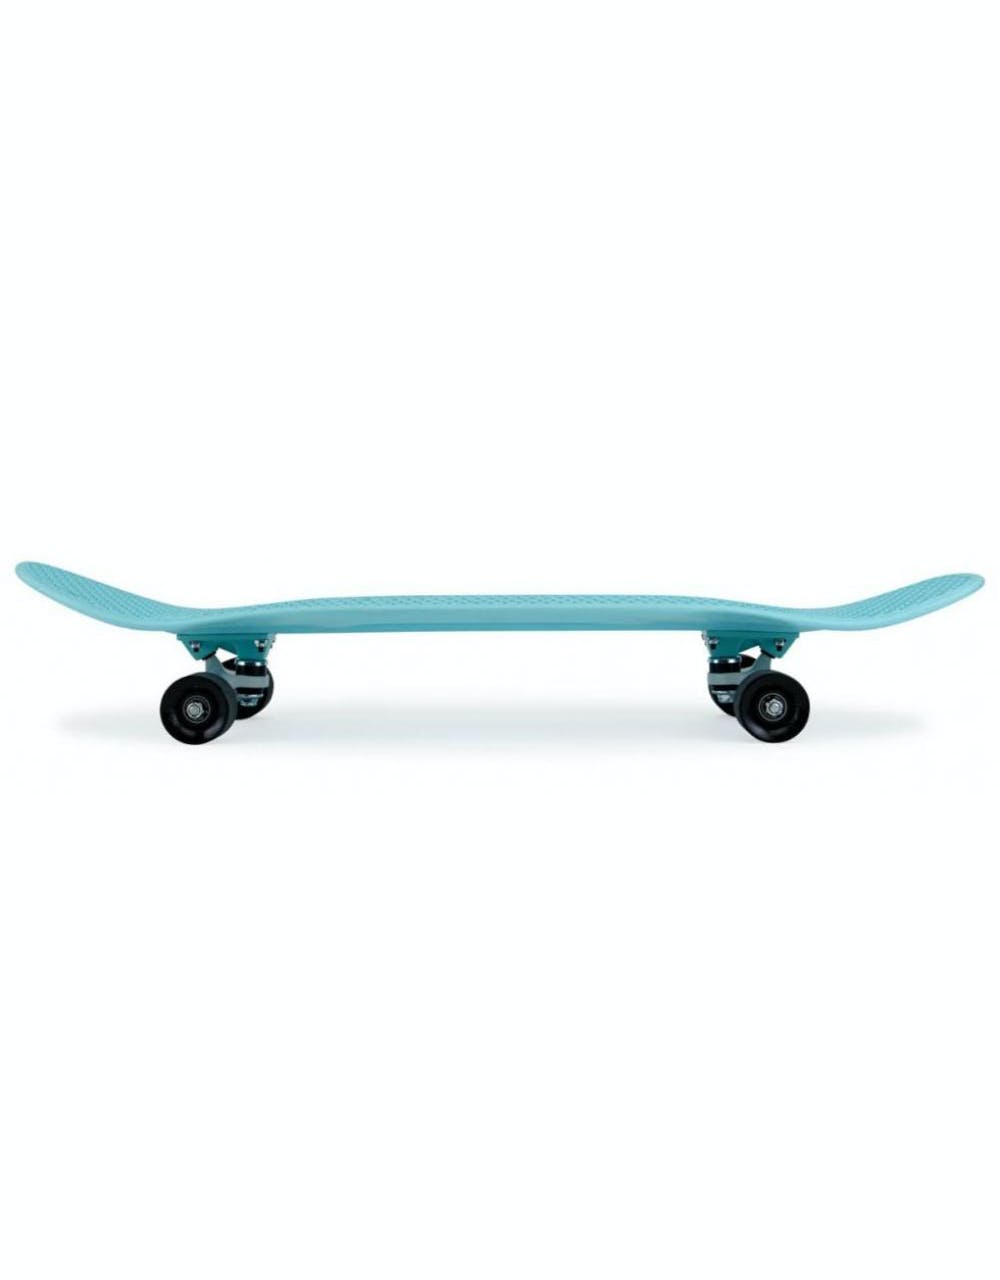 Penny Skateboards Classic Concave Cruiser - 32" - Mint/Black